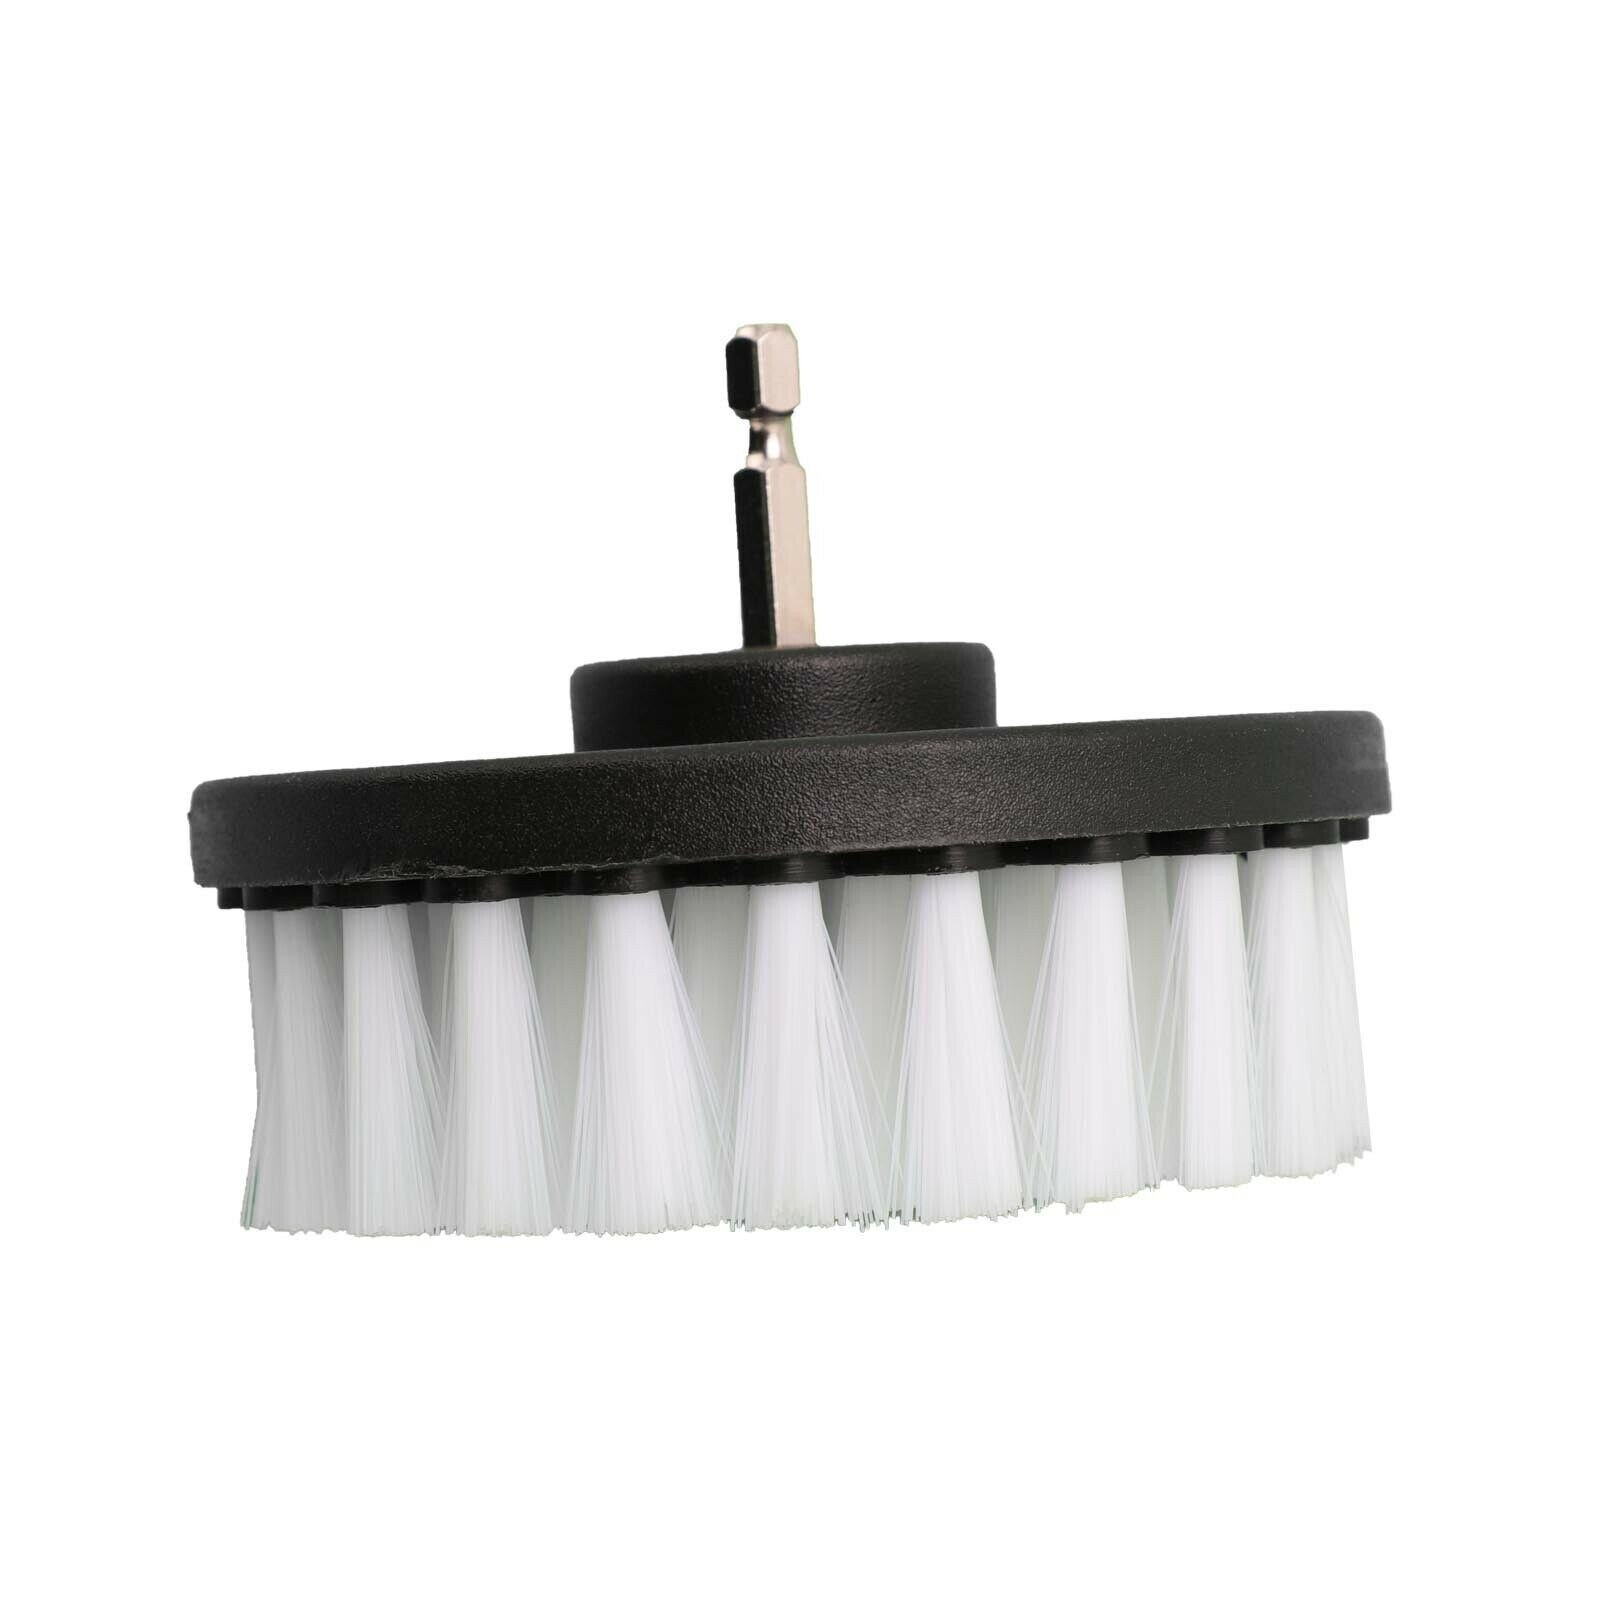 White Soft Brush Attachment For Cleaning Carpet Le...